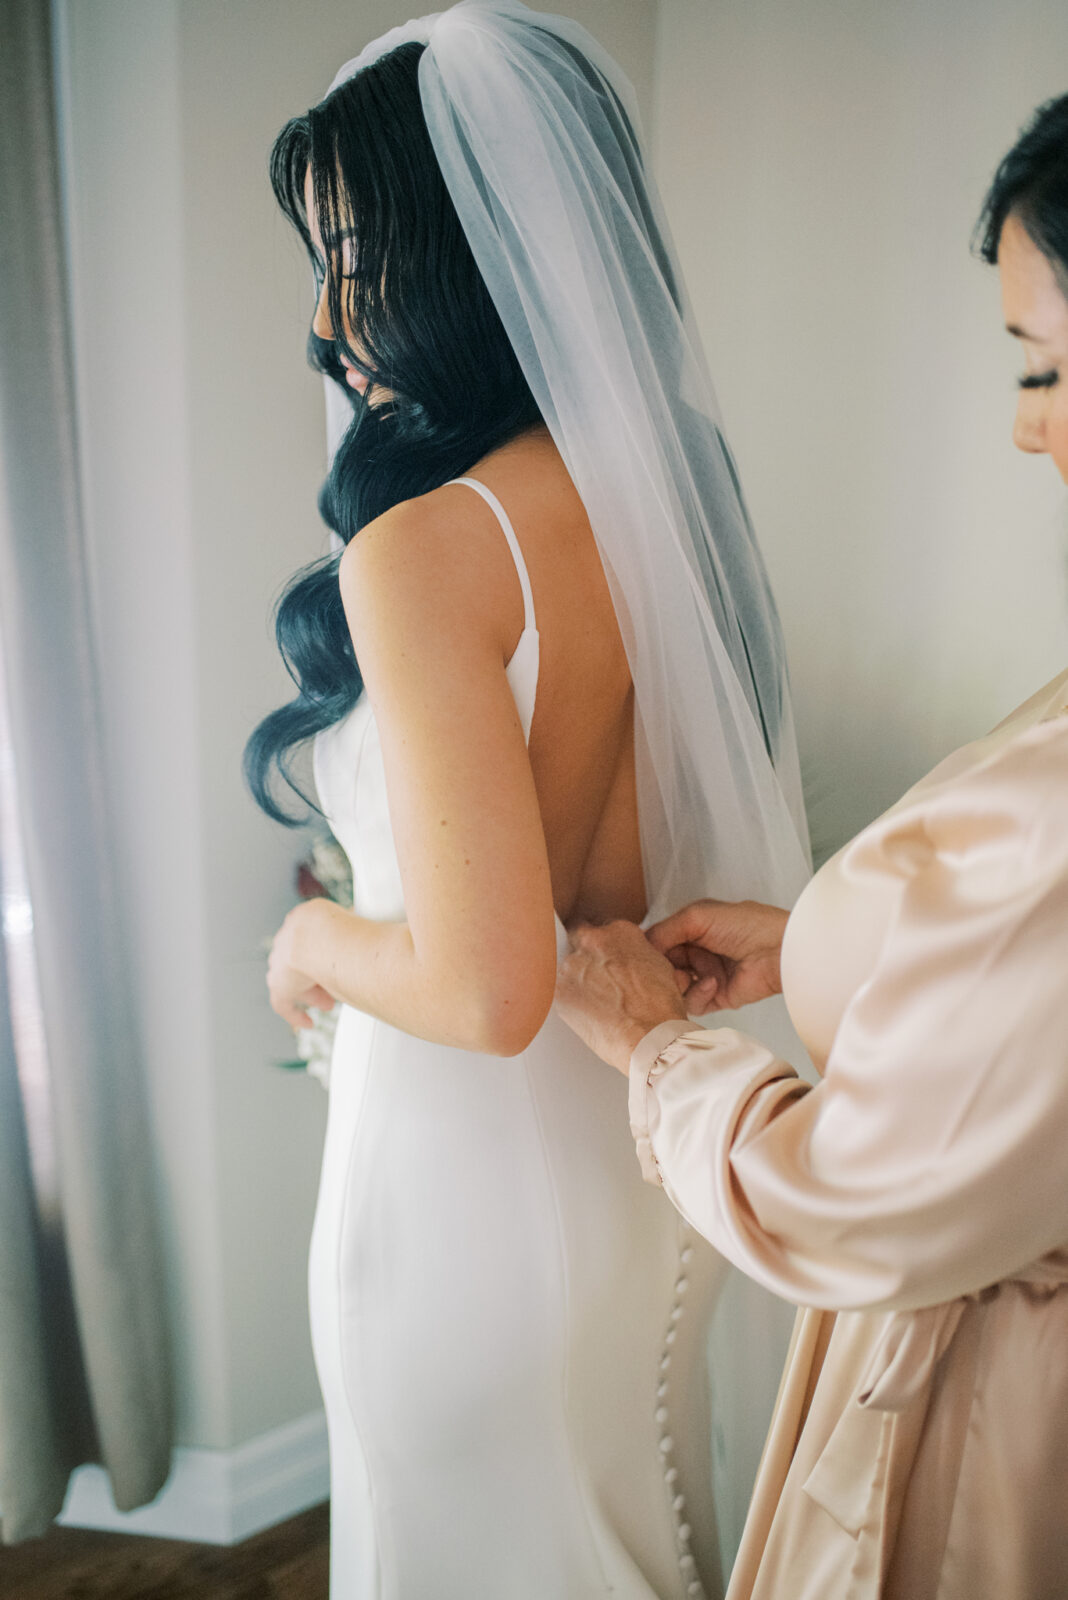 low-back bridal gown with thin straps and small buttons down the back, getting ready photo featuring mother-of-the-bride fastening wedding gown